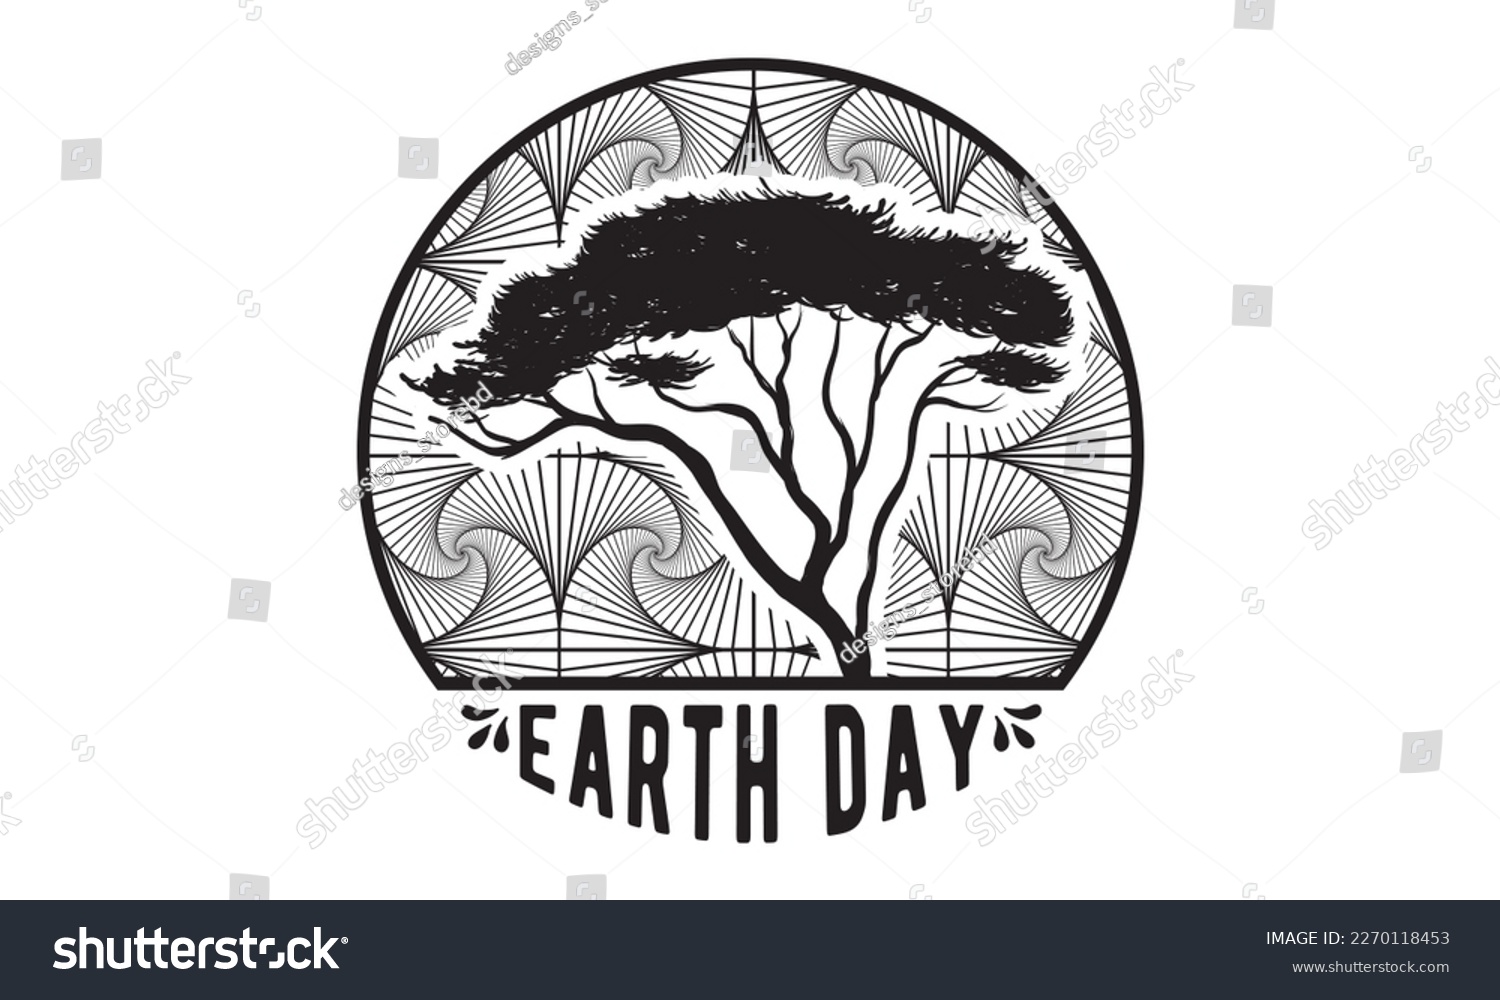 SVG of Earth day svg, Earth day svg design bundle, Earth tshirt design bundle, April 22, earth vecttor icon map space, cut File Cricut, Printable Vector Illustration, tshirt eps svg